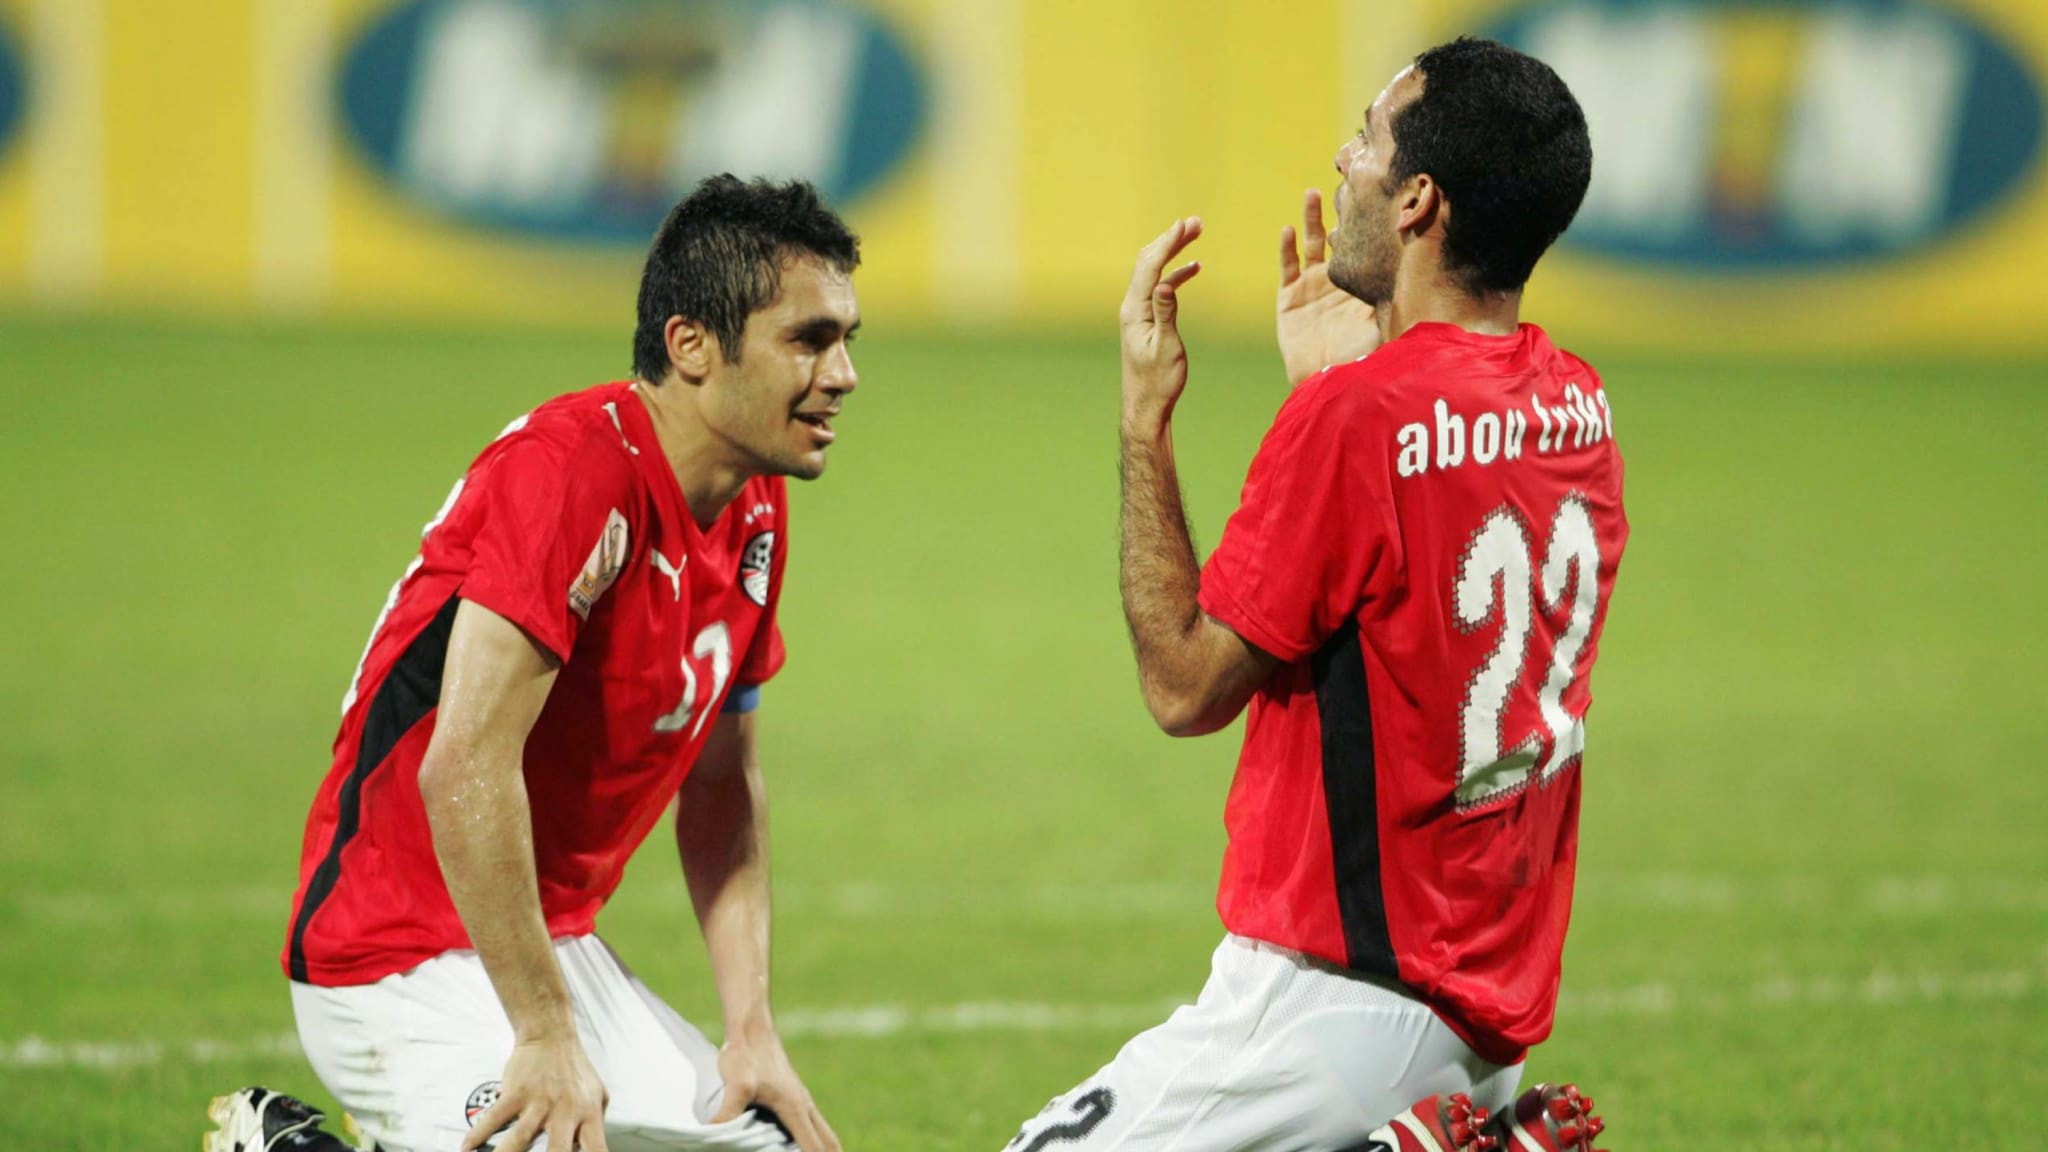 Welcome to FIFA.com News: It will be difficult for Egypt to qualify